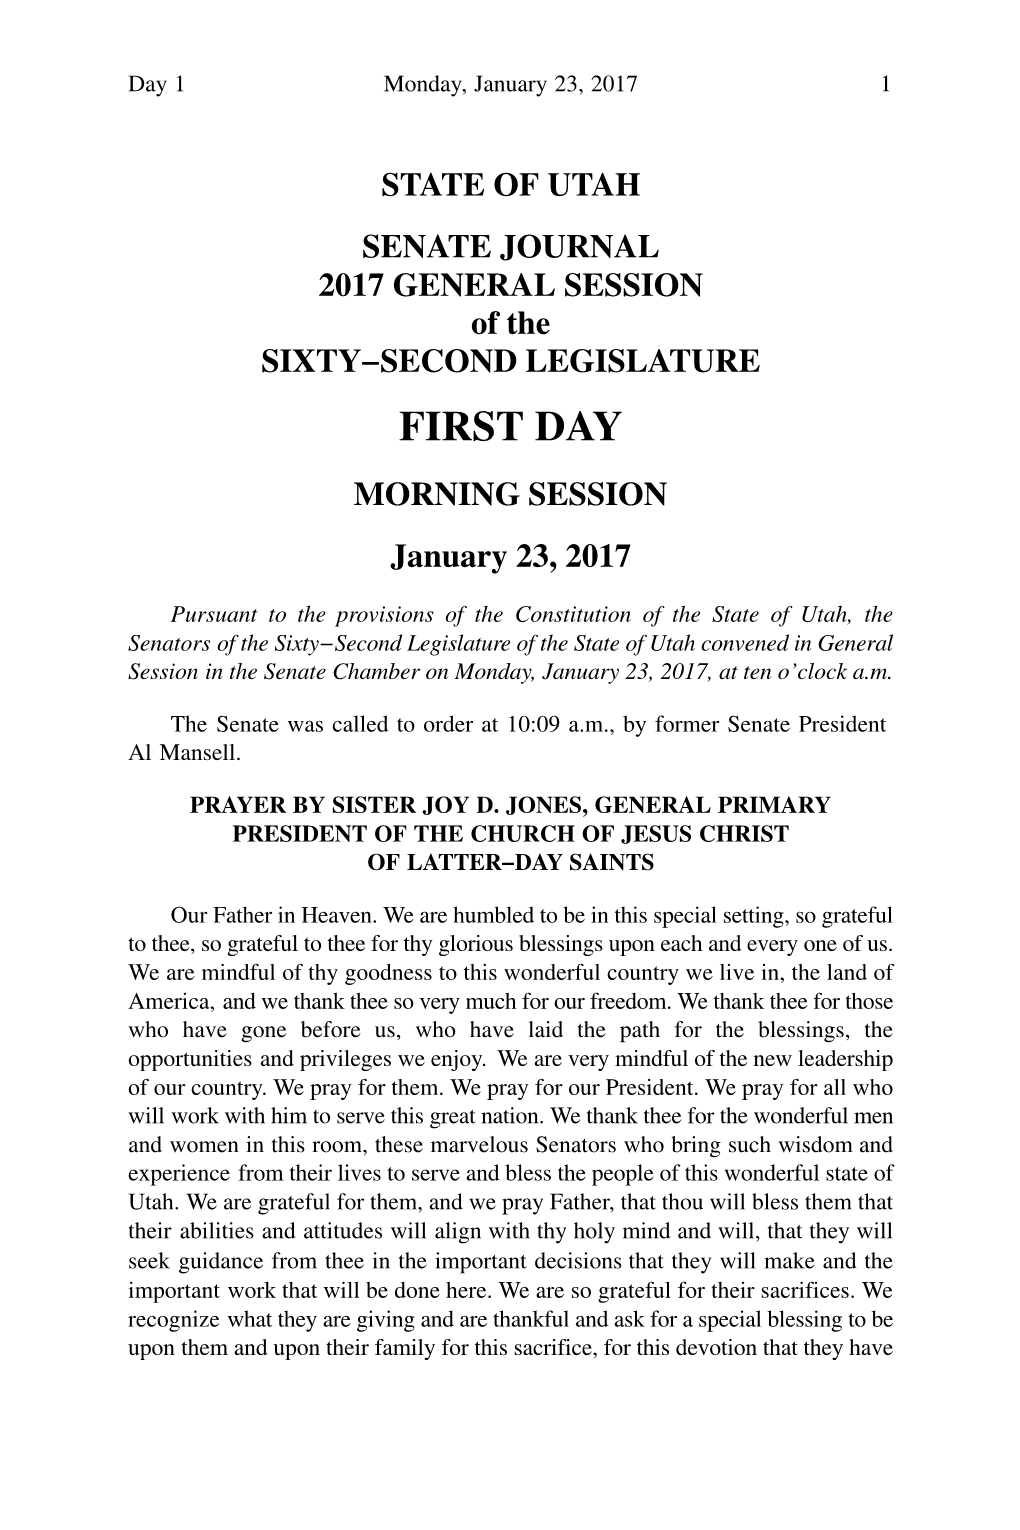 FIRST DAY MORNING SESSION January 23, 2017